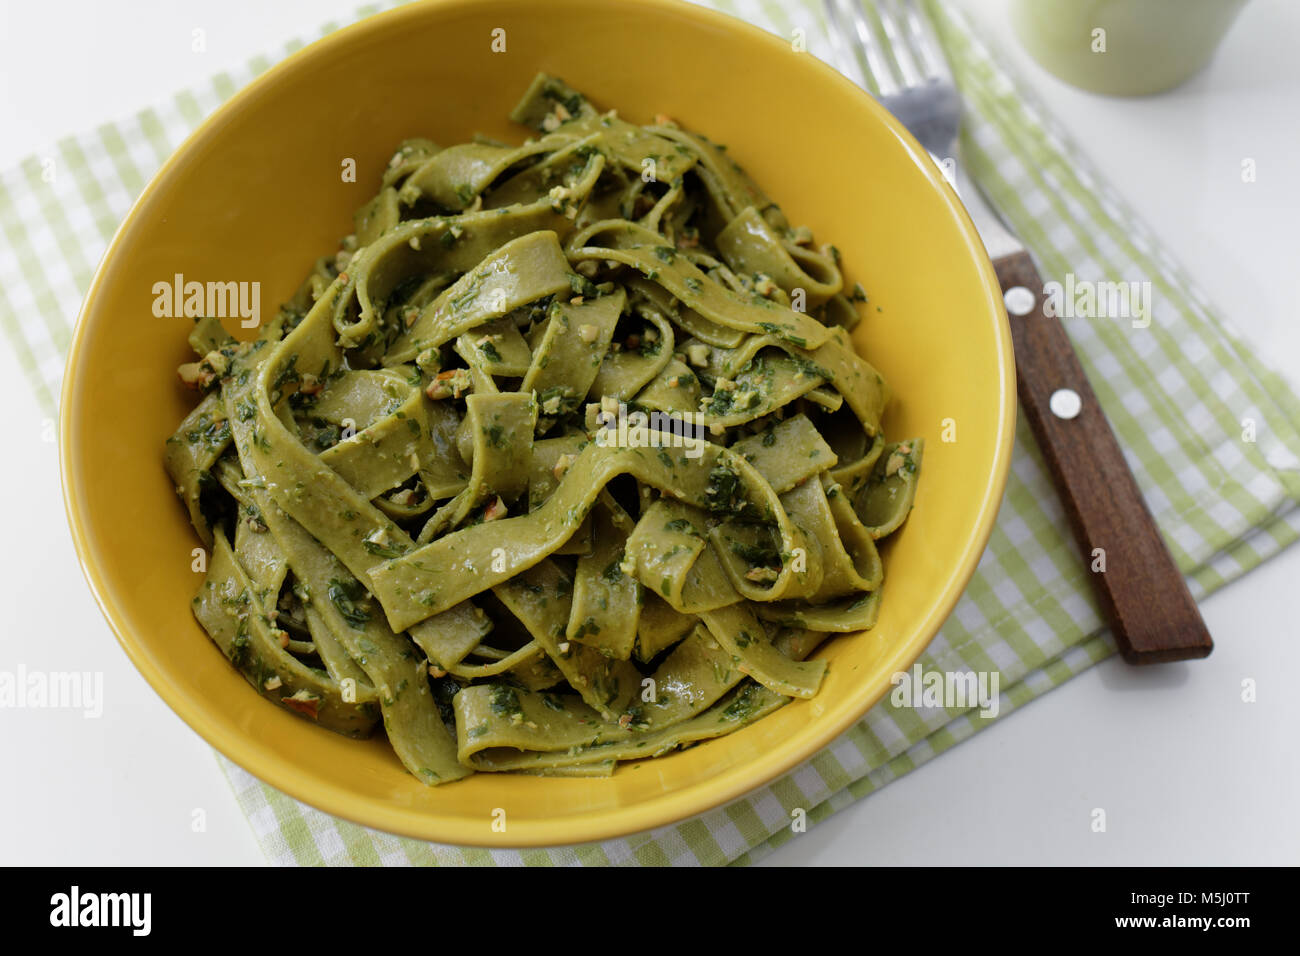 Spinach pasta with pesto sauce in a yellow bowl Stock Photo